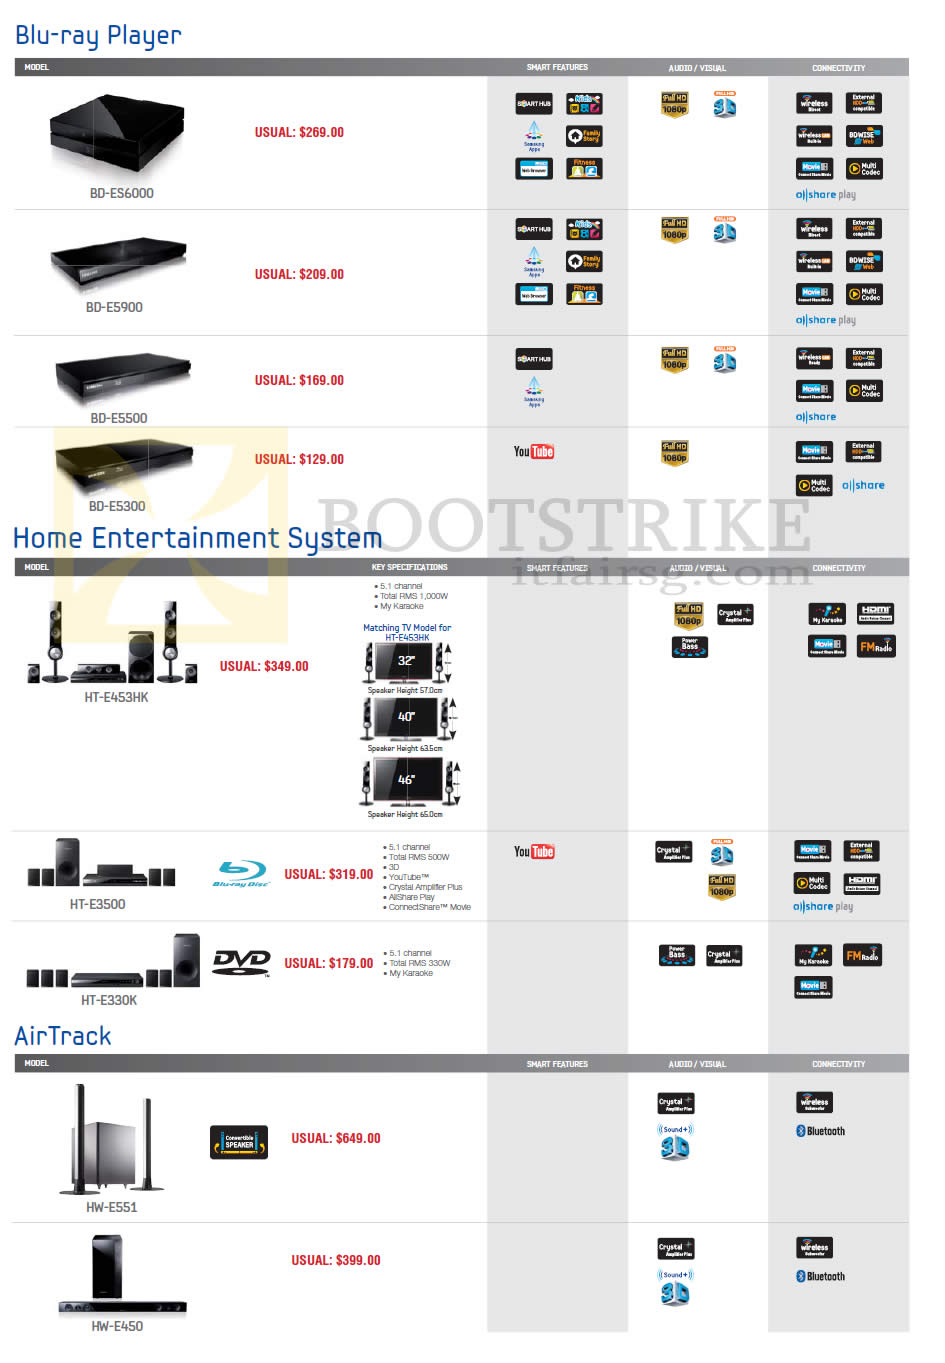 SITEX 2012 price list image brochure of Samsung Courts Blu-Ray Player, Home Entertainment System, AirTrack